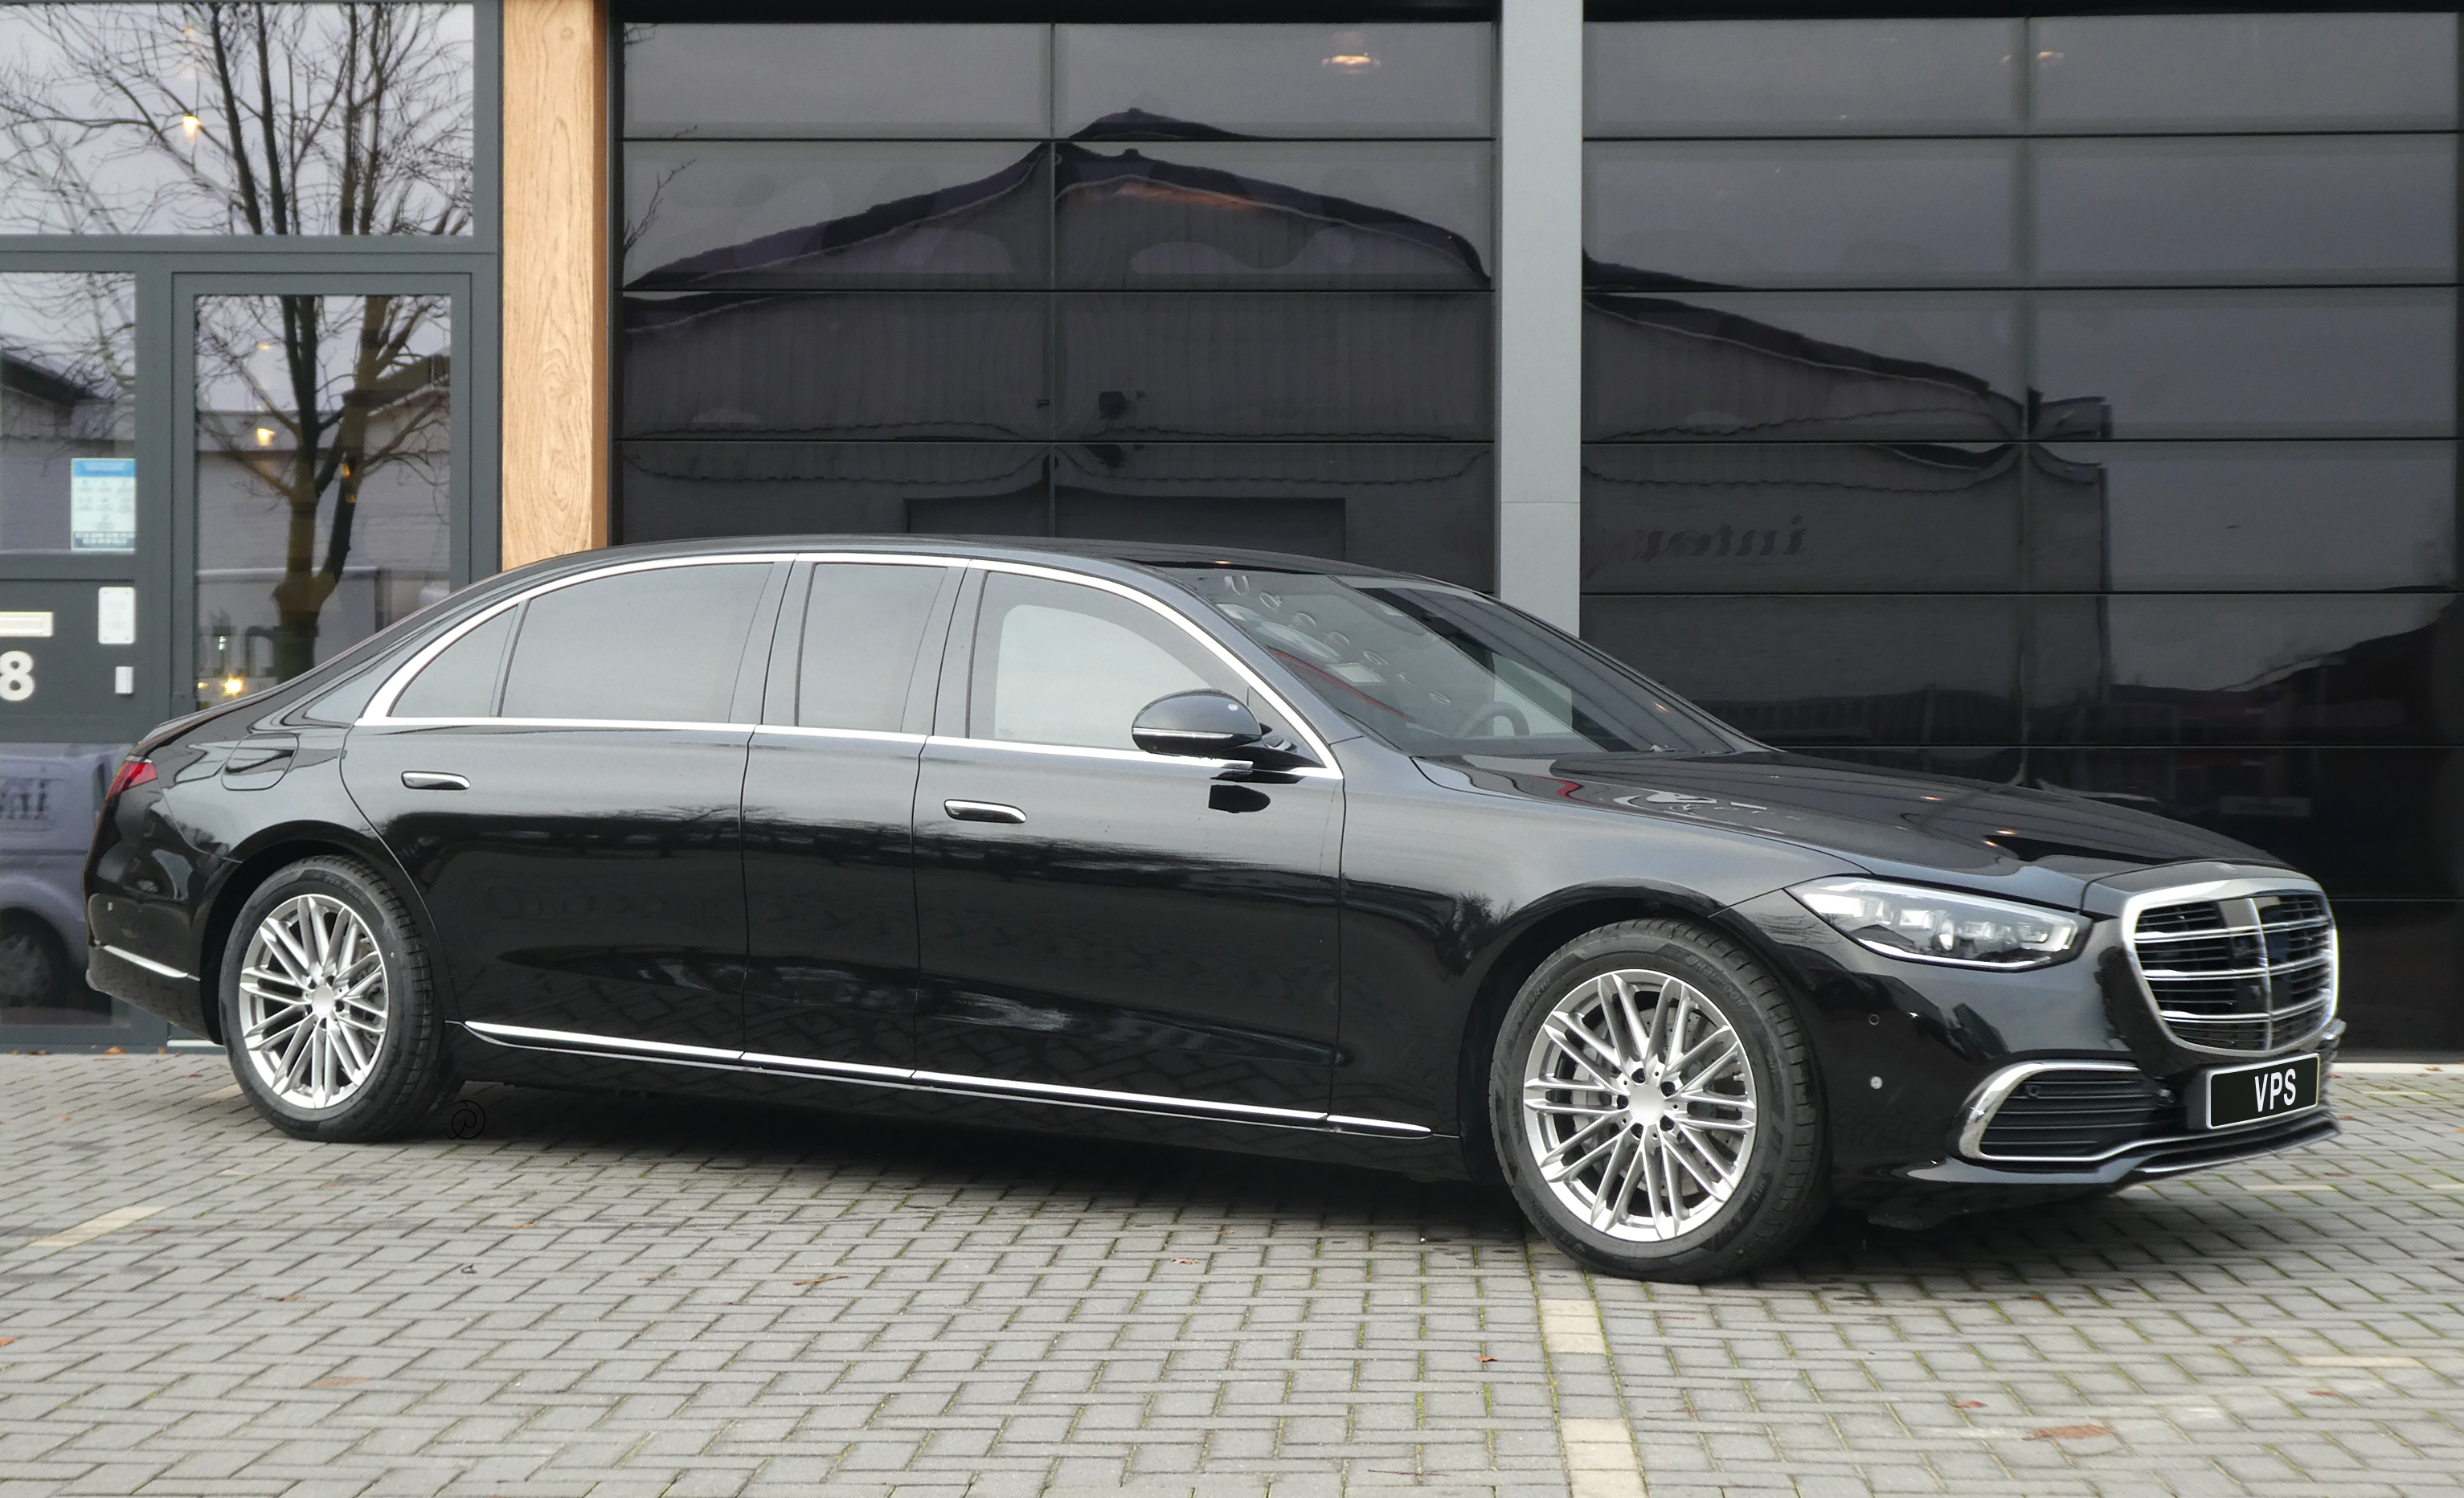 Luxury class stretched and discreetly armored limousine &quot;DIPLOMAT&quot; based on all-new Mercedes-Benz S450/500L V223 4Matic in CEN B4, 2023YP.